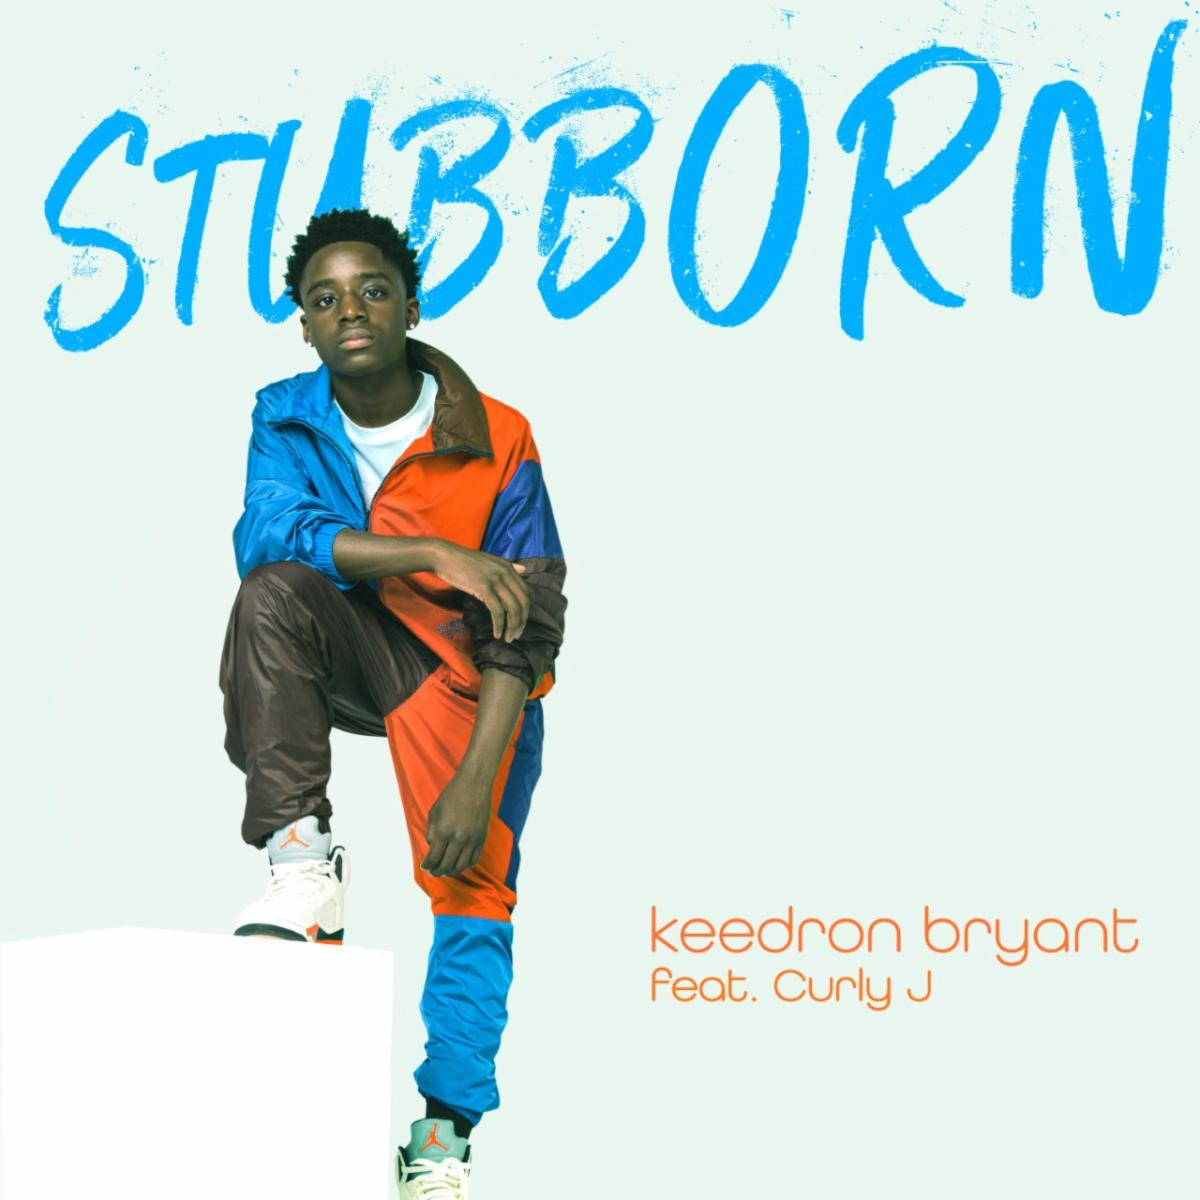 KEEDRON BRYANT RELEASES GLOWING SINGLE AND VIDEO “STUBBORN” FEAT. CURLY J